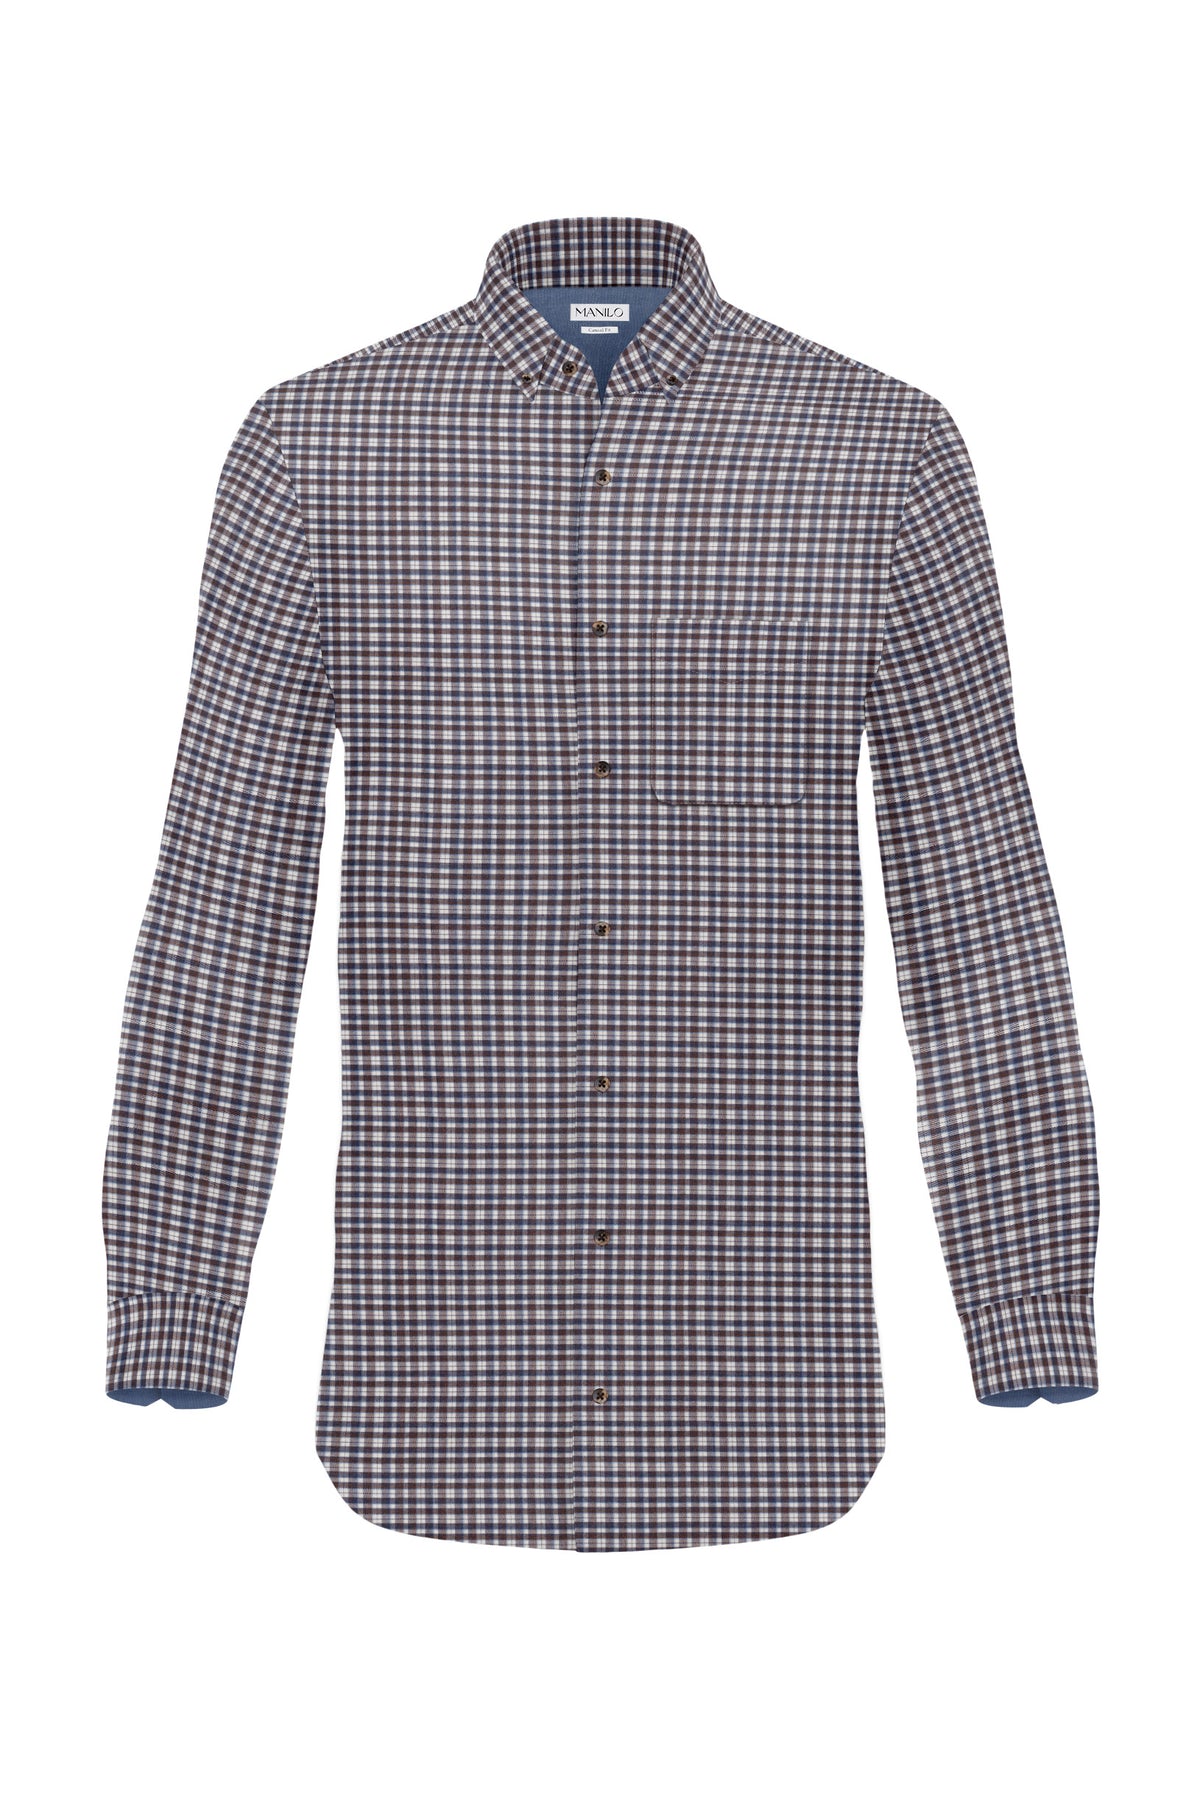 Casual shirt with check pattern in blue/white (Art. 2121-C)